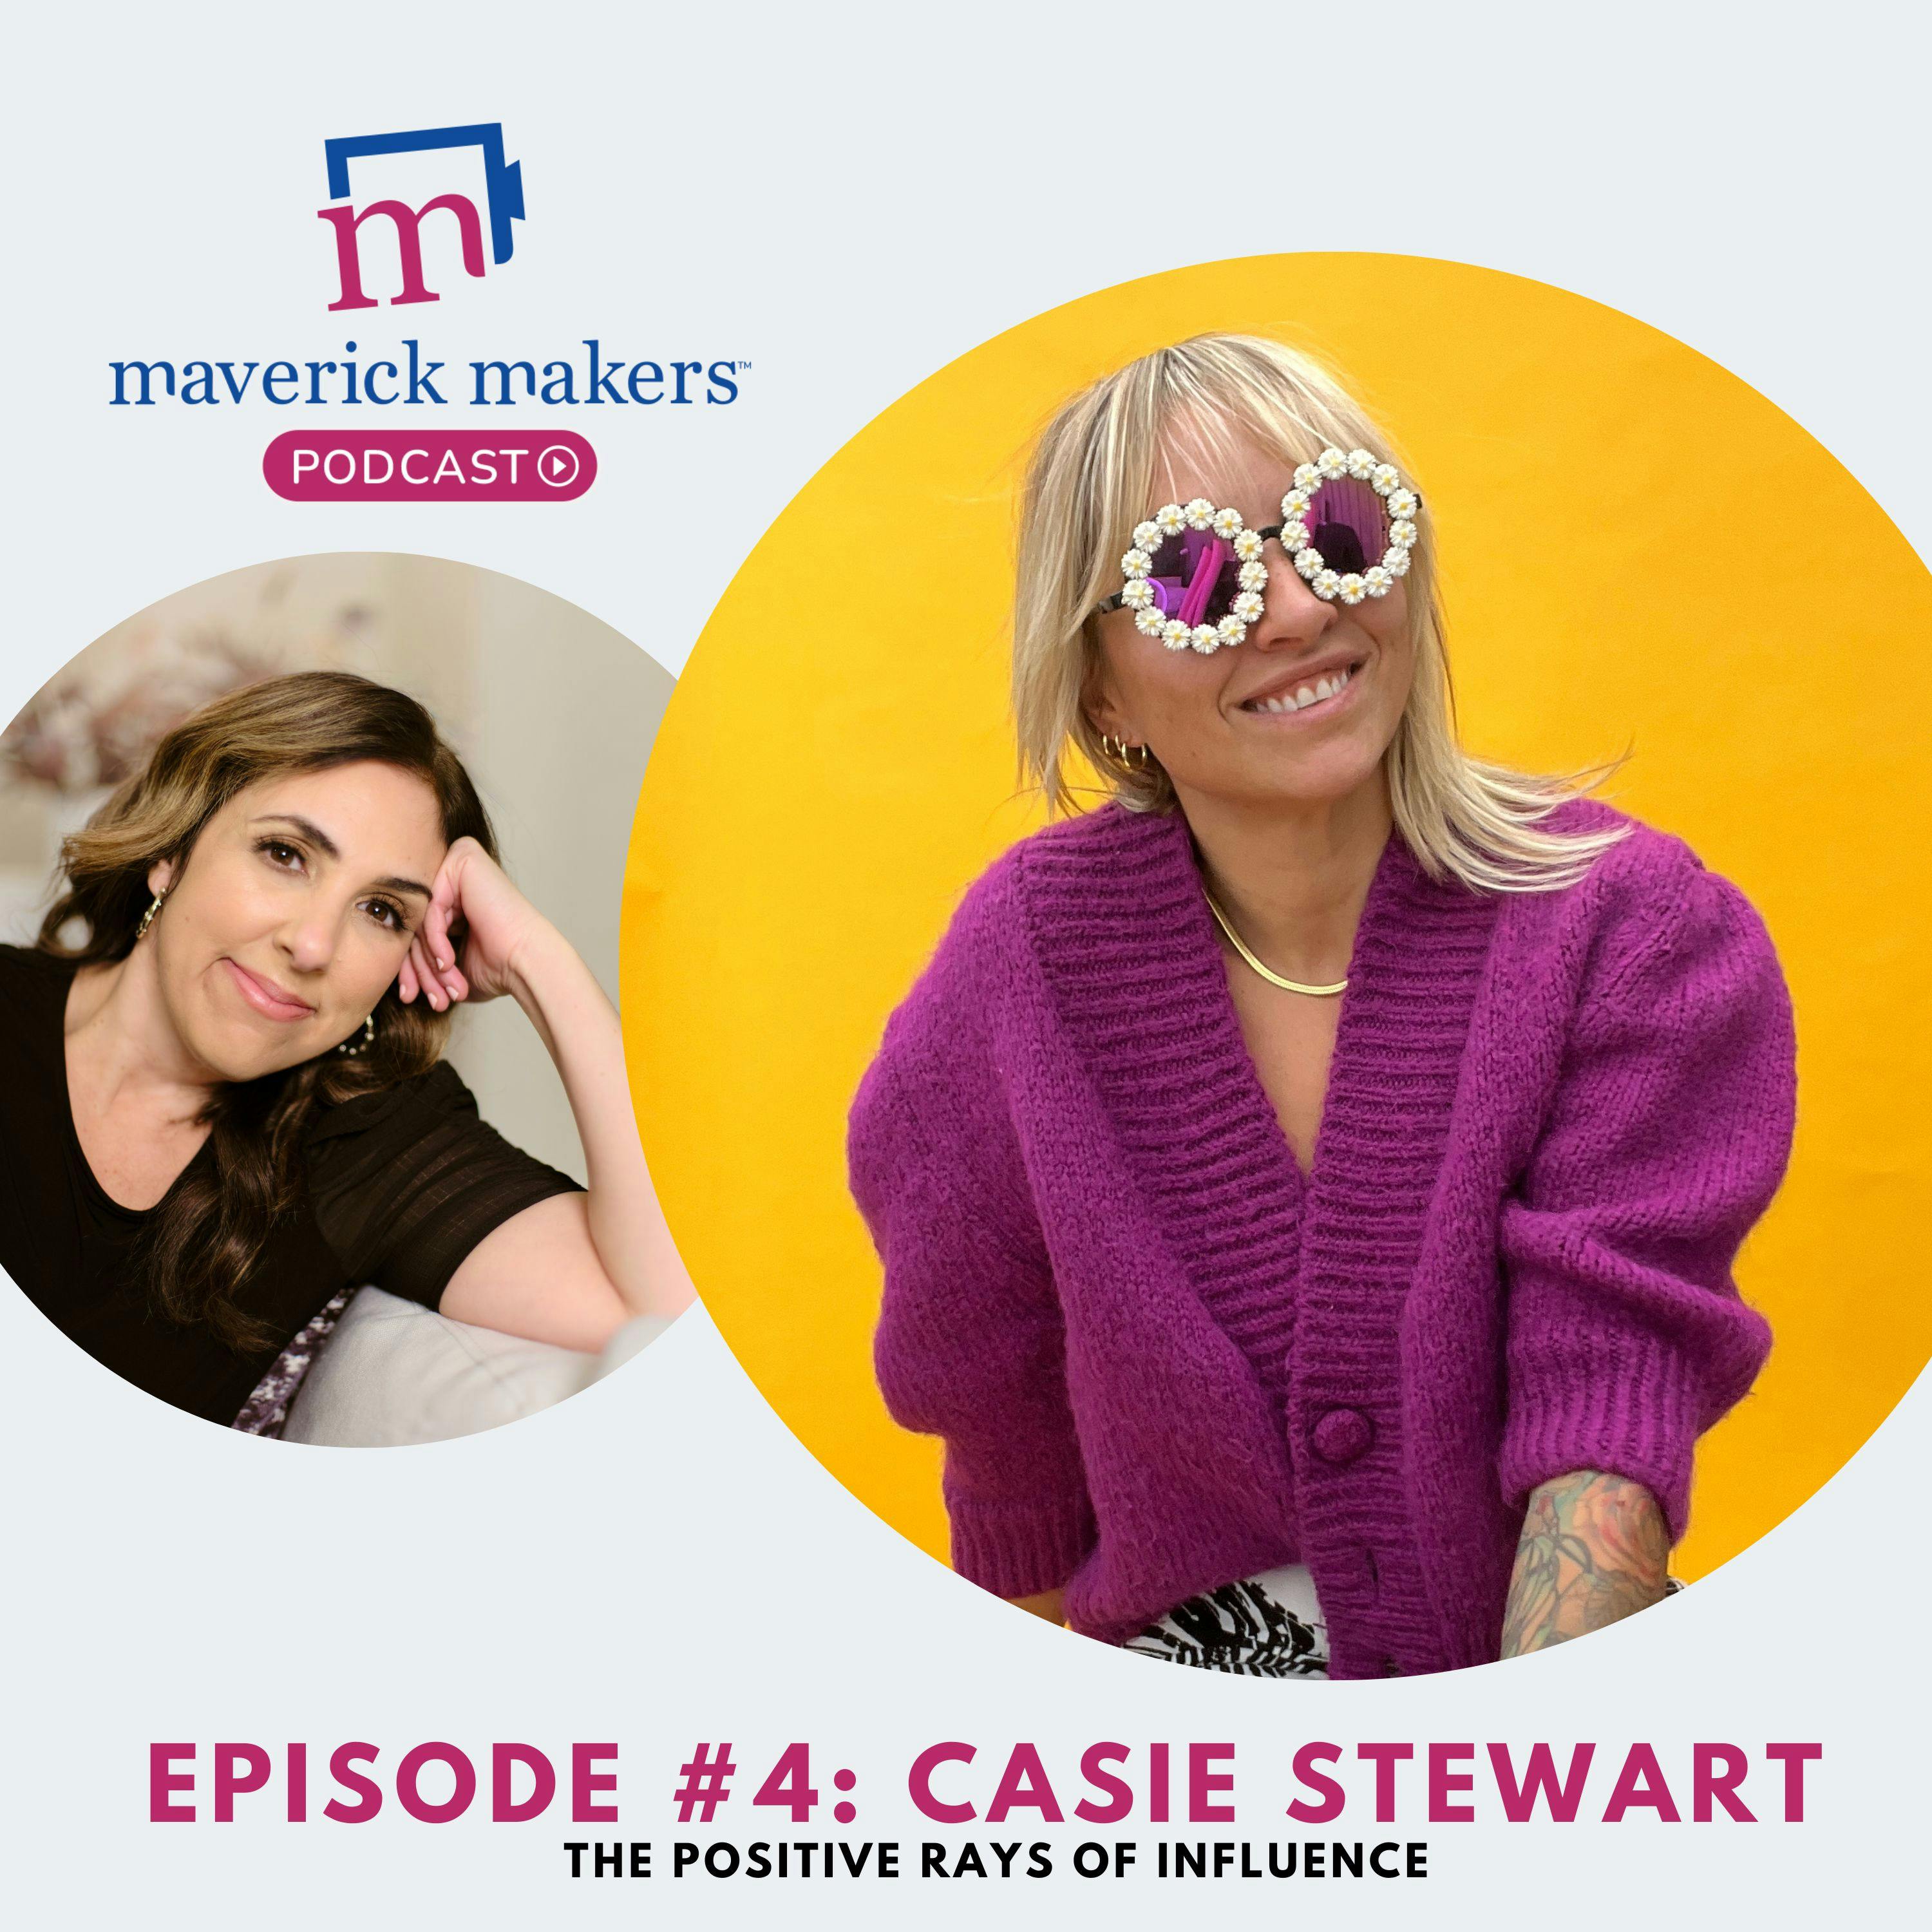 Casie Stewart - The Positive Rays of Influence